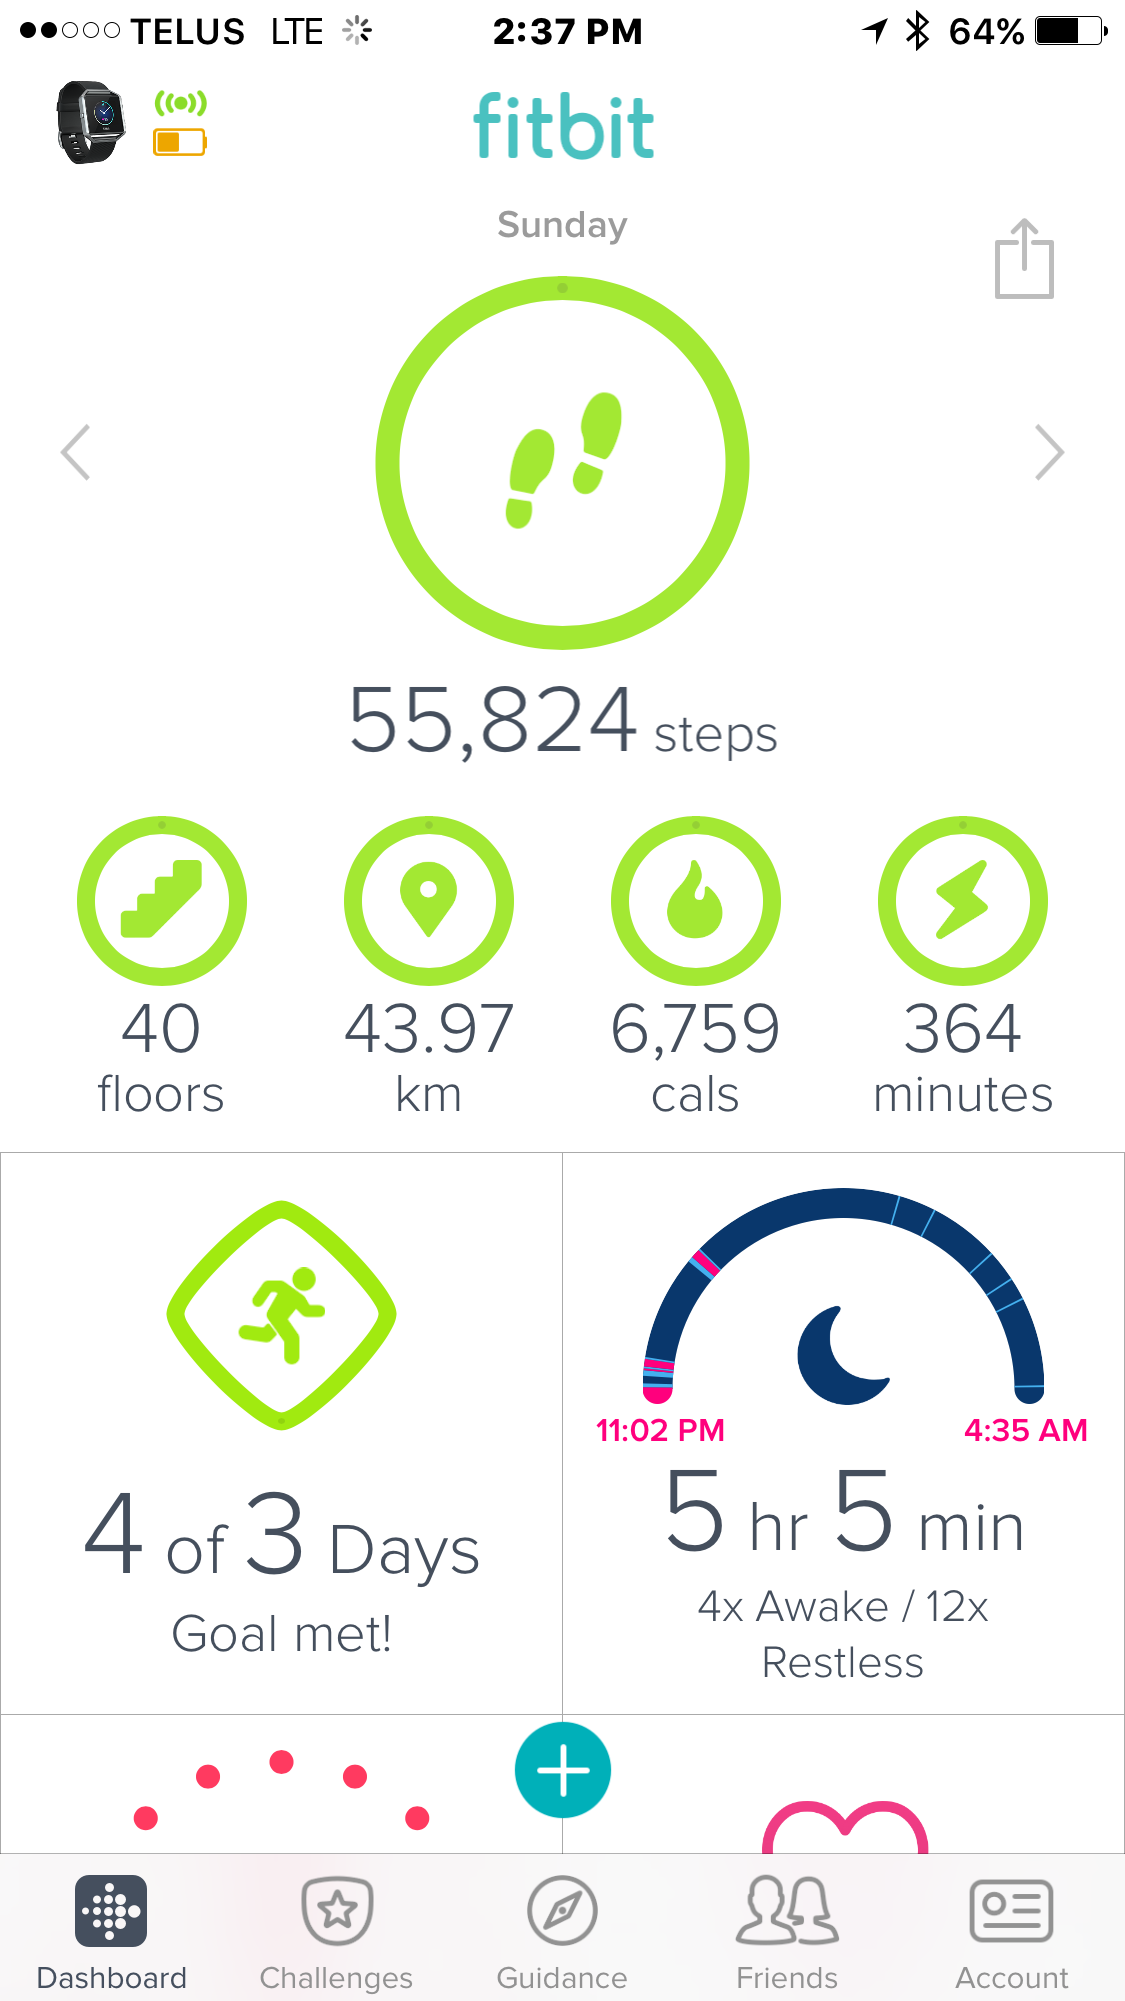 What is the most amount of steps anyone 